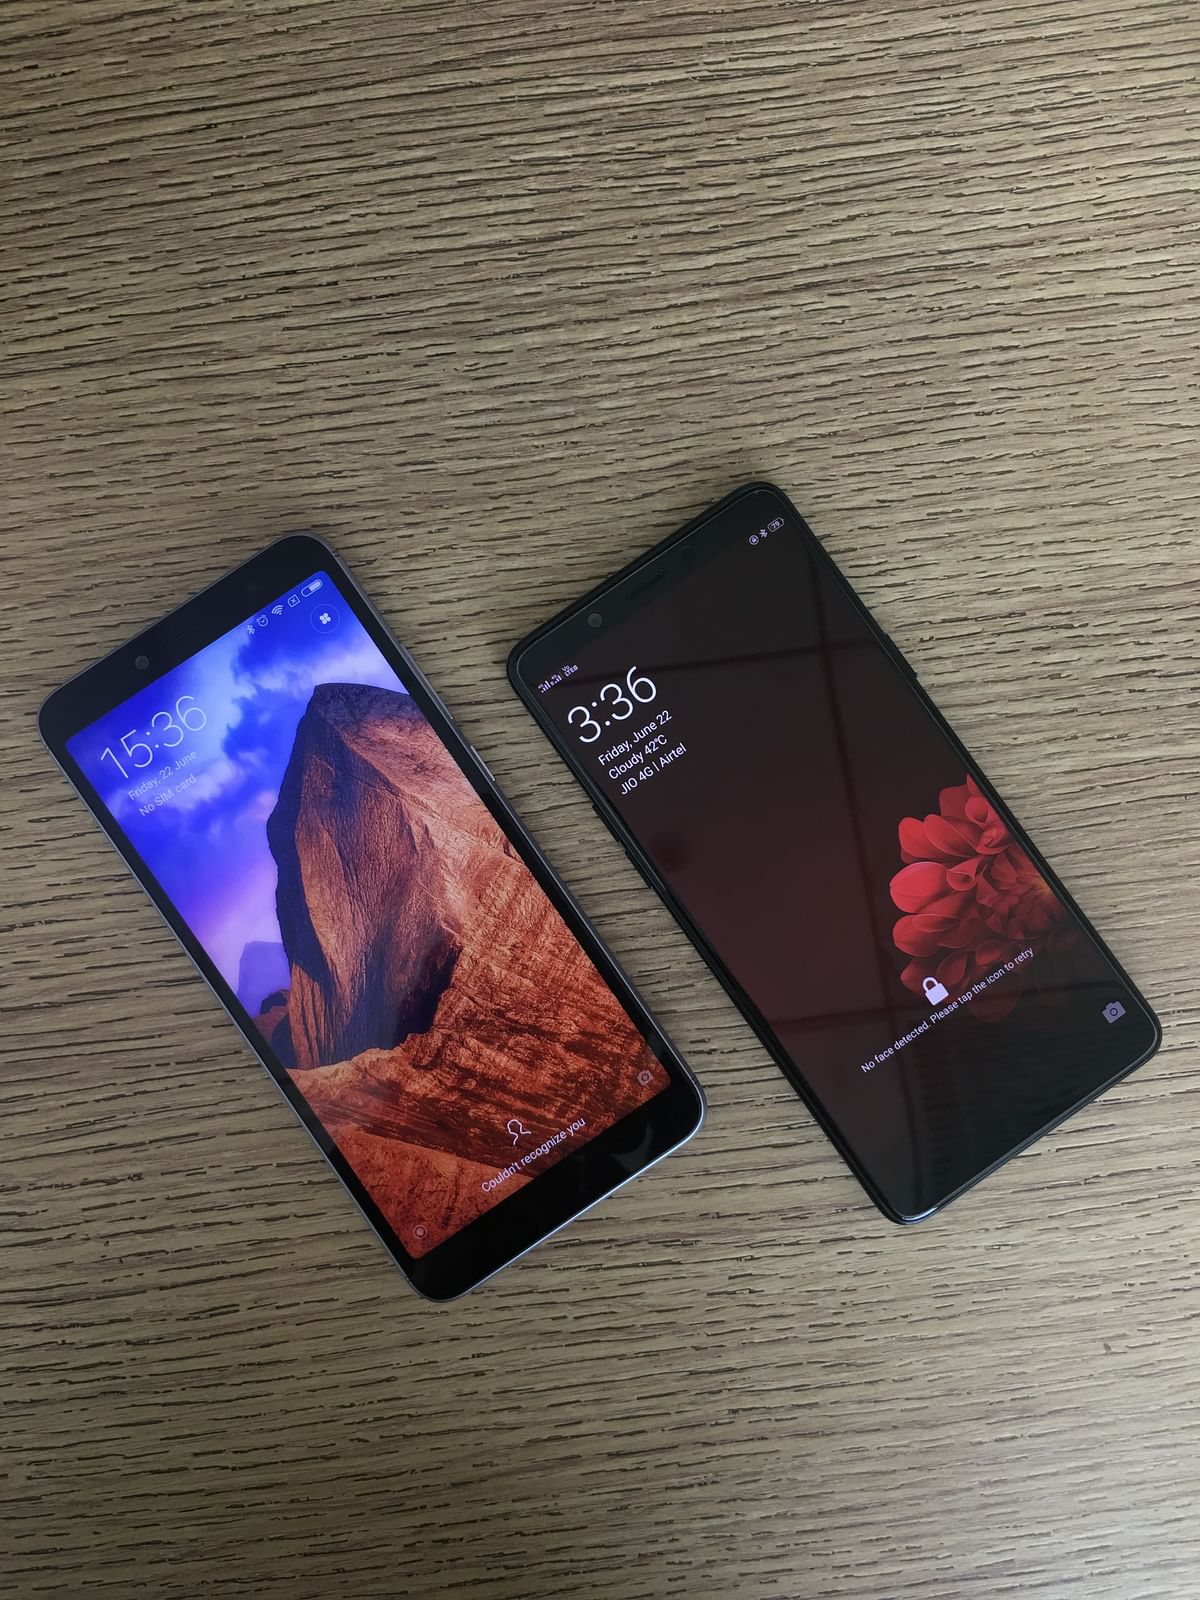 Which is the smartest phone under Rs 10,000? We compare the Oppo Realme 1 and Xiaomi Redmi Y2. 